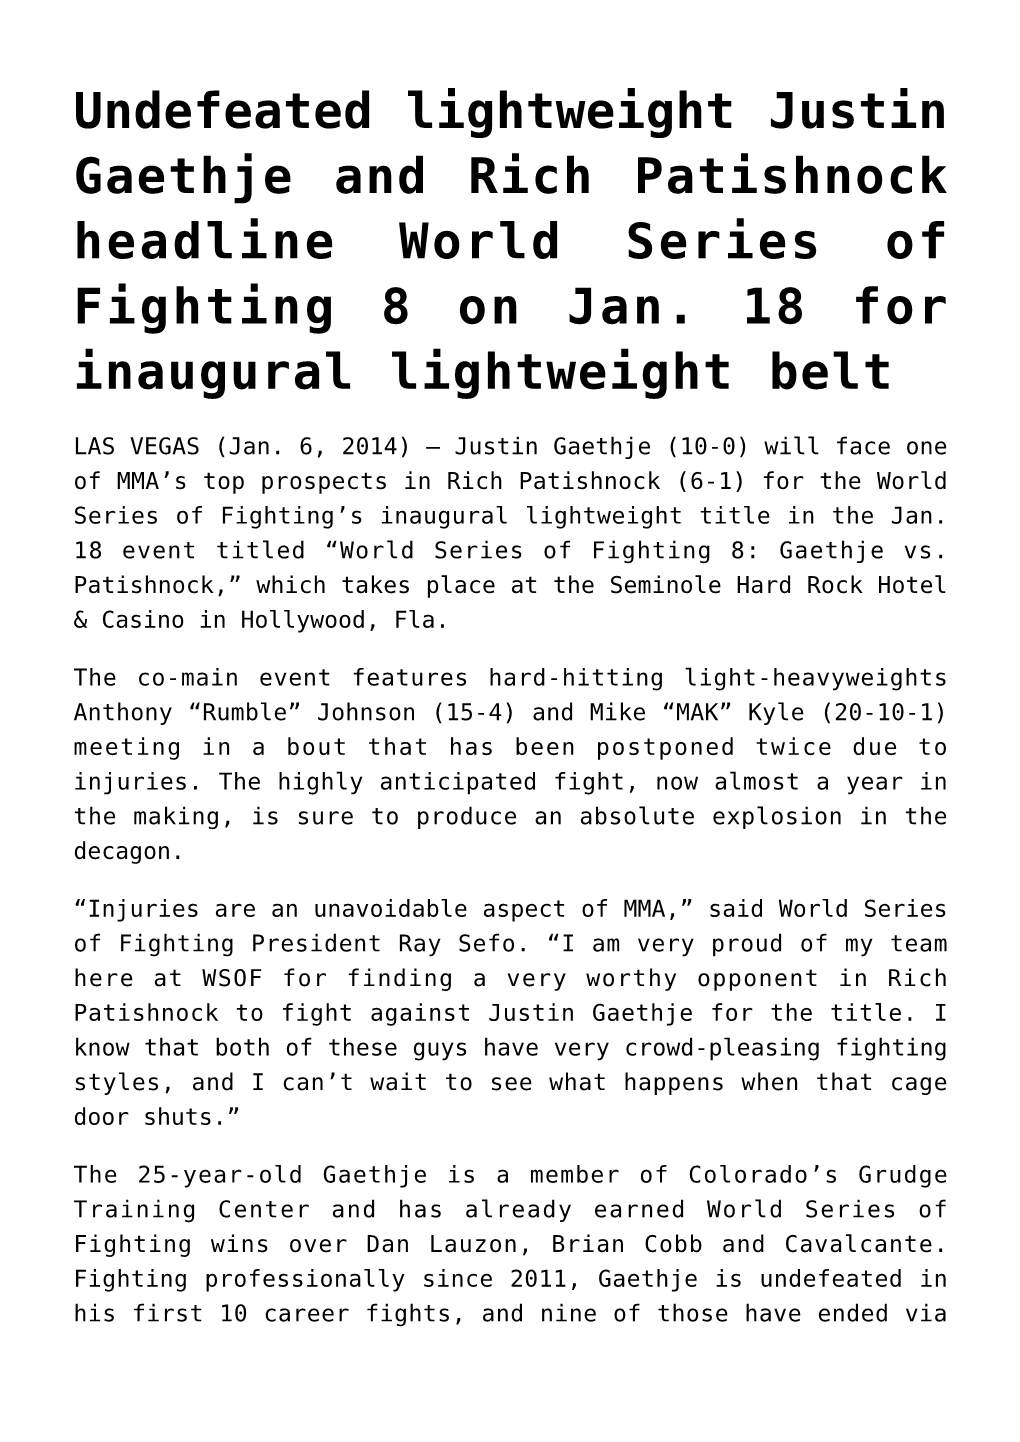 Undefeated Lightweight Justin Gaethje and Rich Patishnock Headline World Series of Fighting 8 on Jan. 18 for Inaugural Lightweight Belt